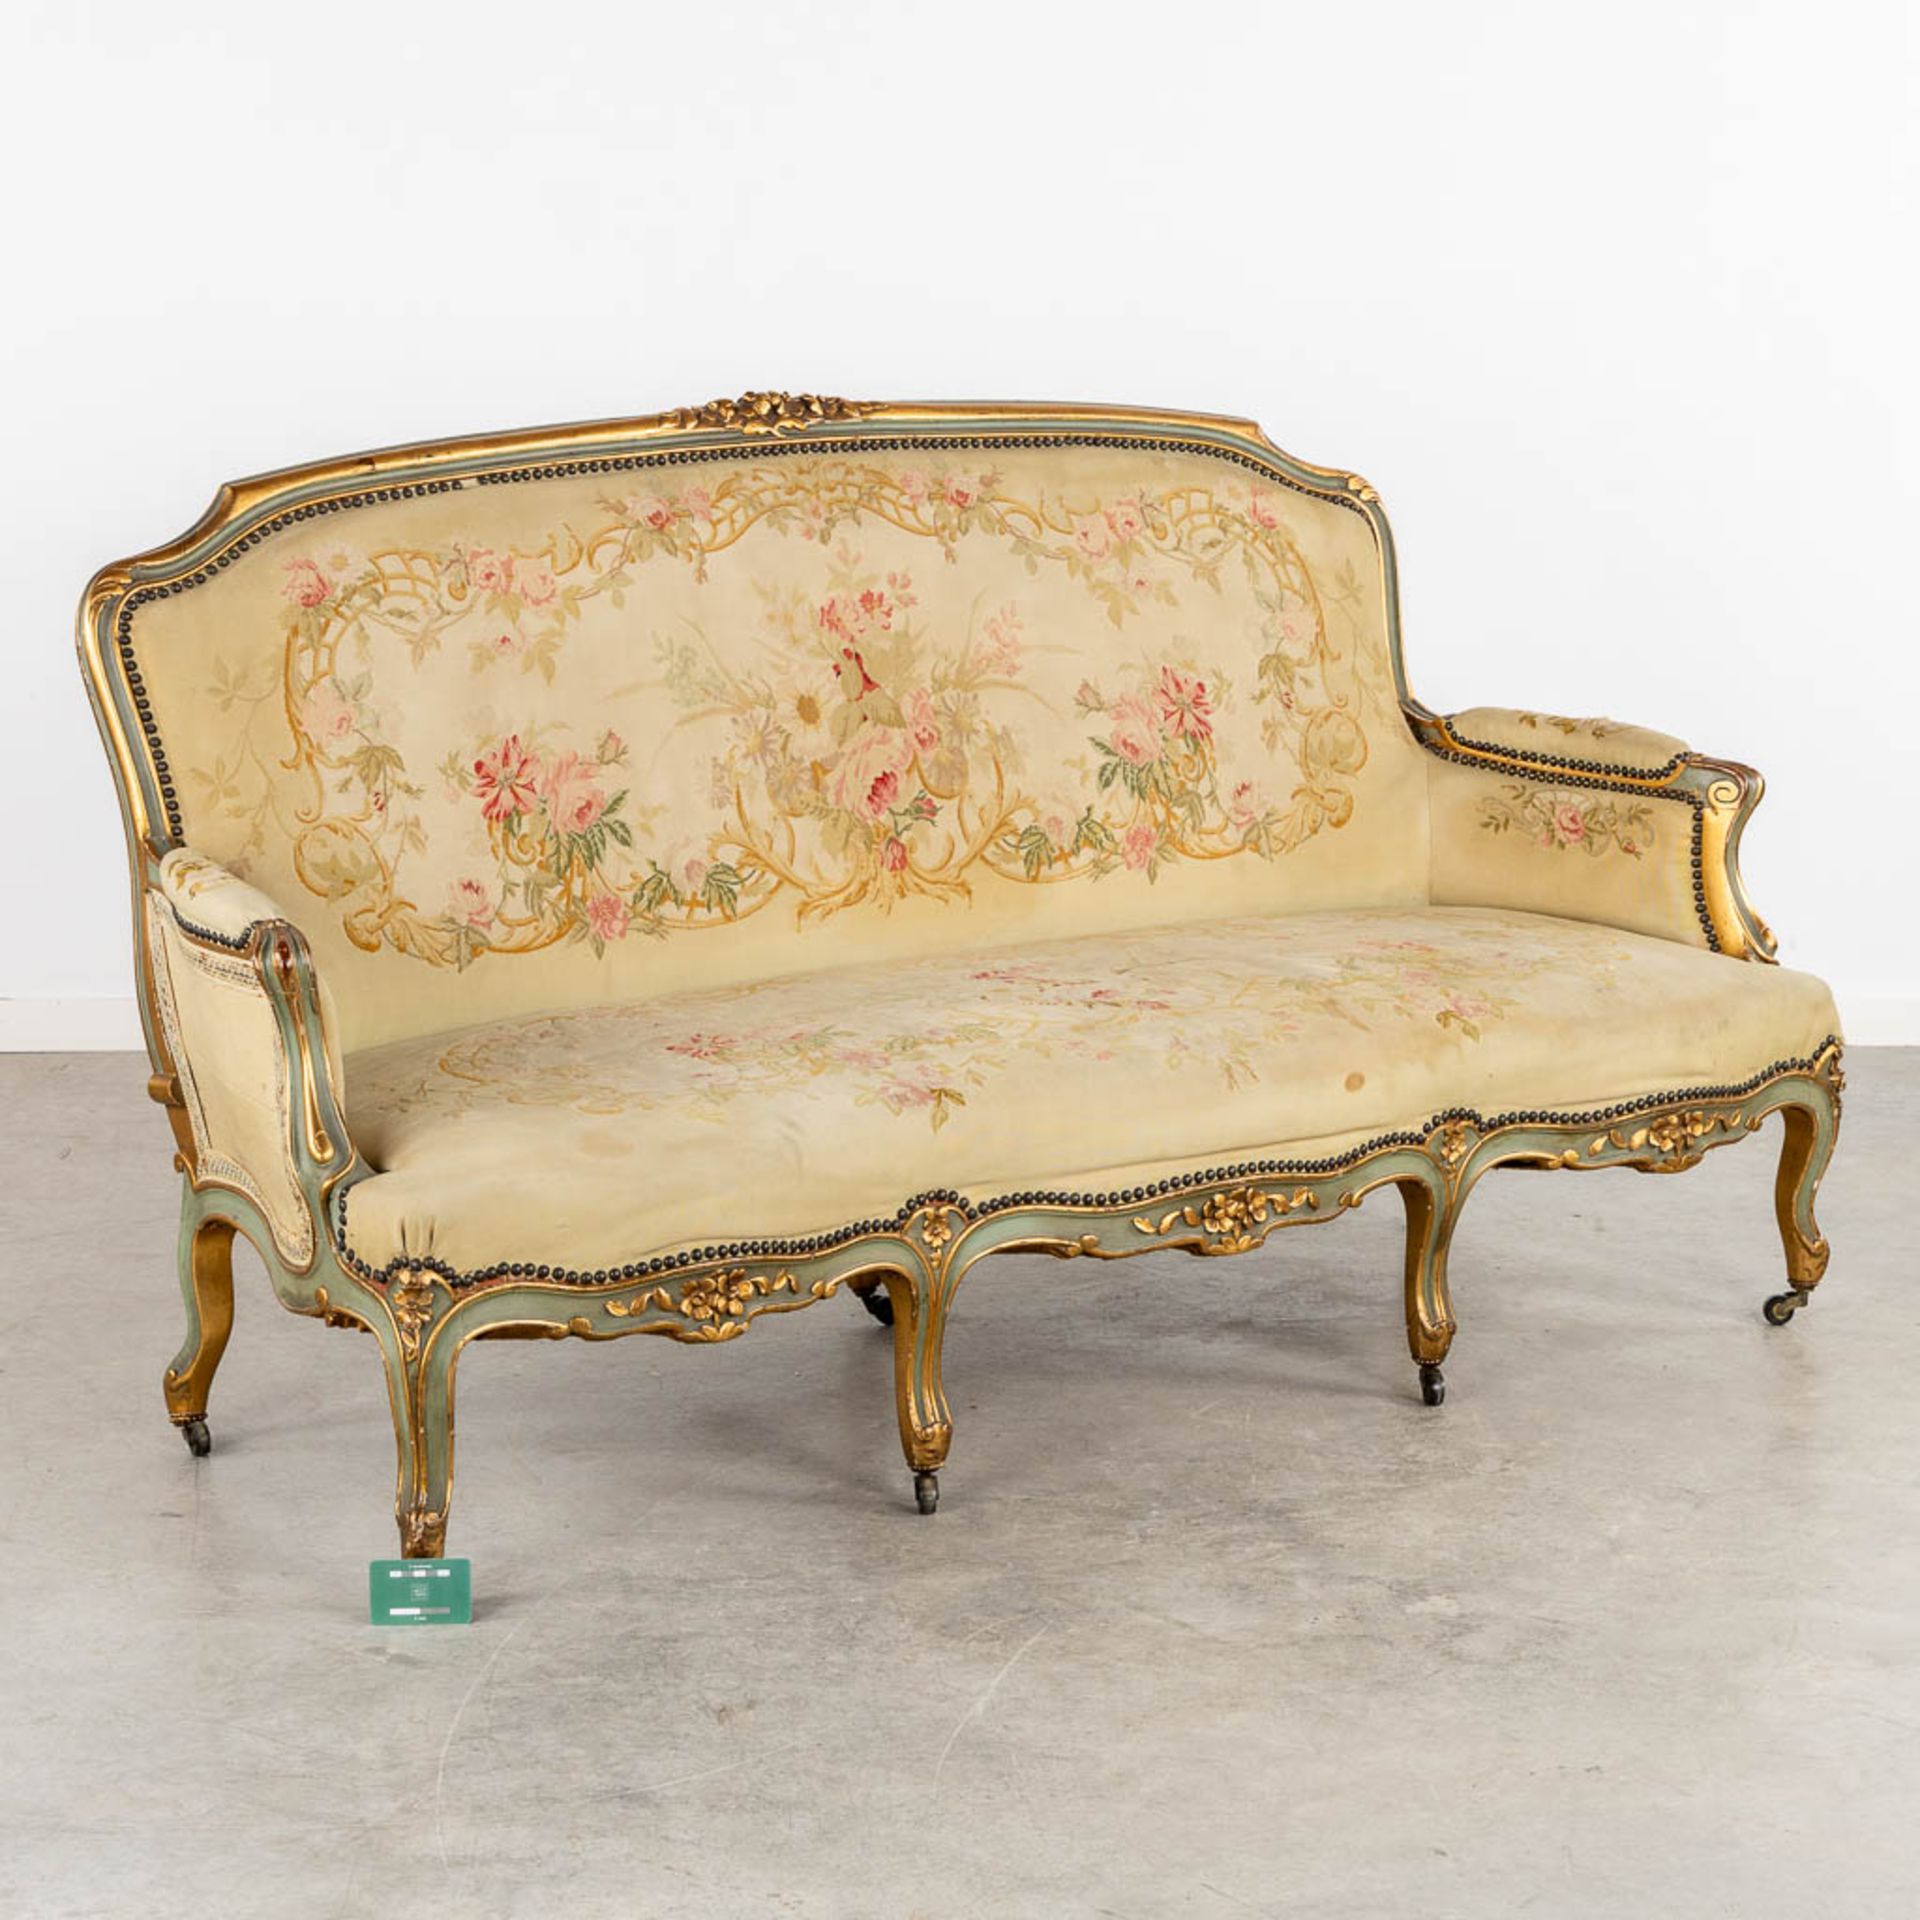 A Louis XV style sofa, upholstered with flower embroideries. (L:80 x W:175 x H:96 cm) - Bild 2 aus 11